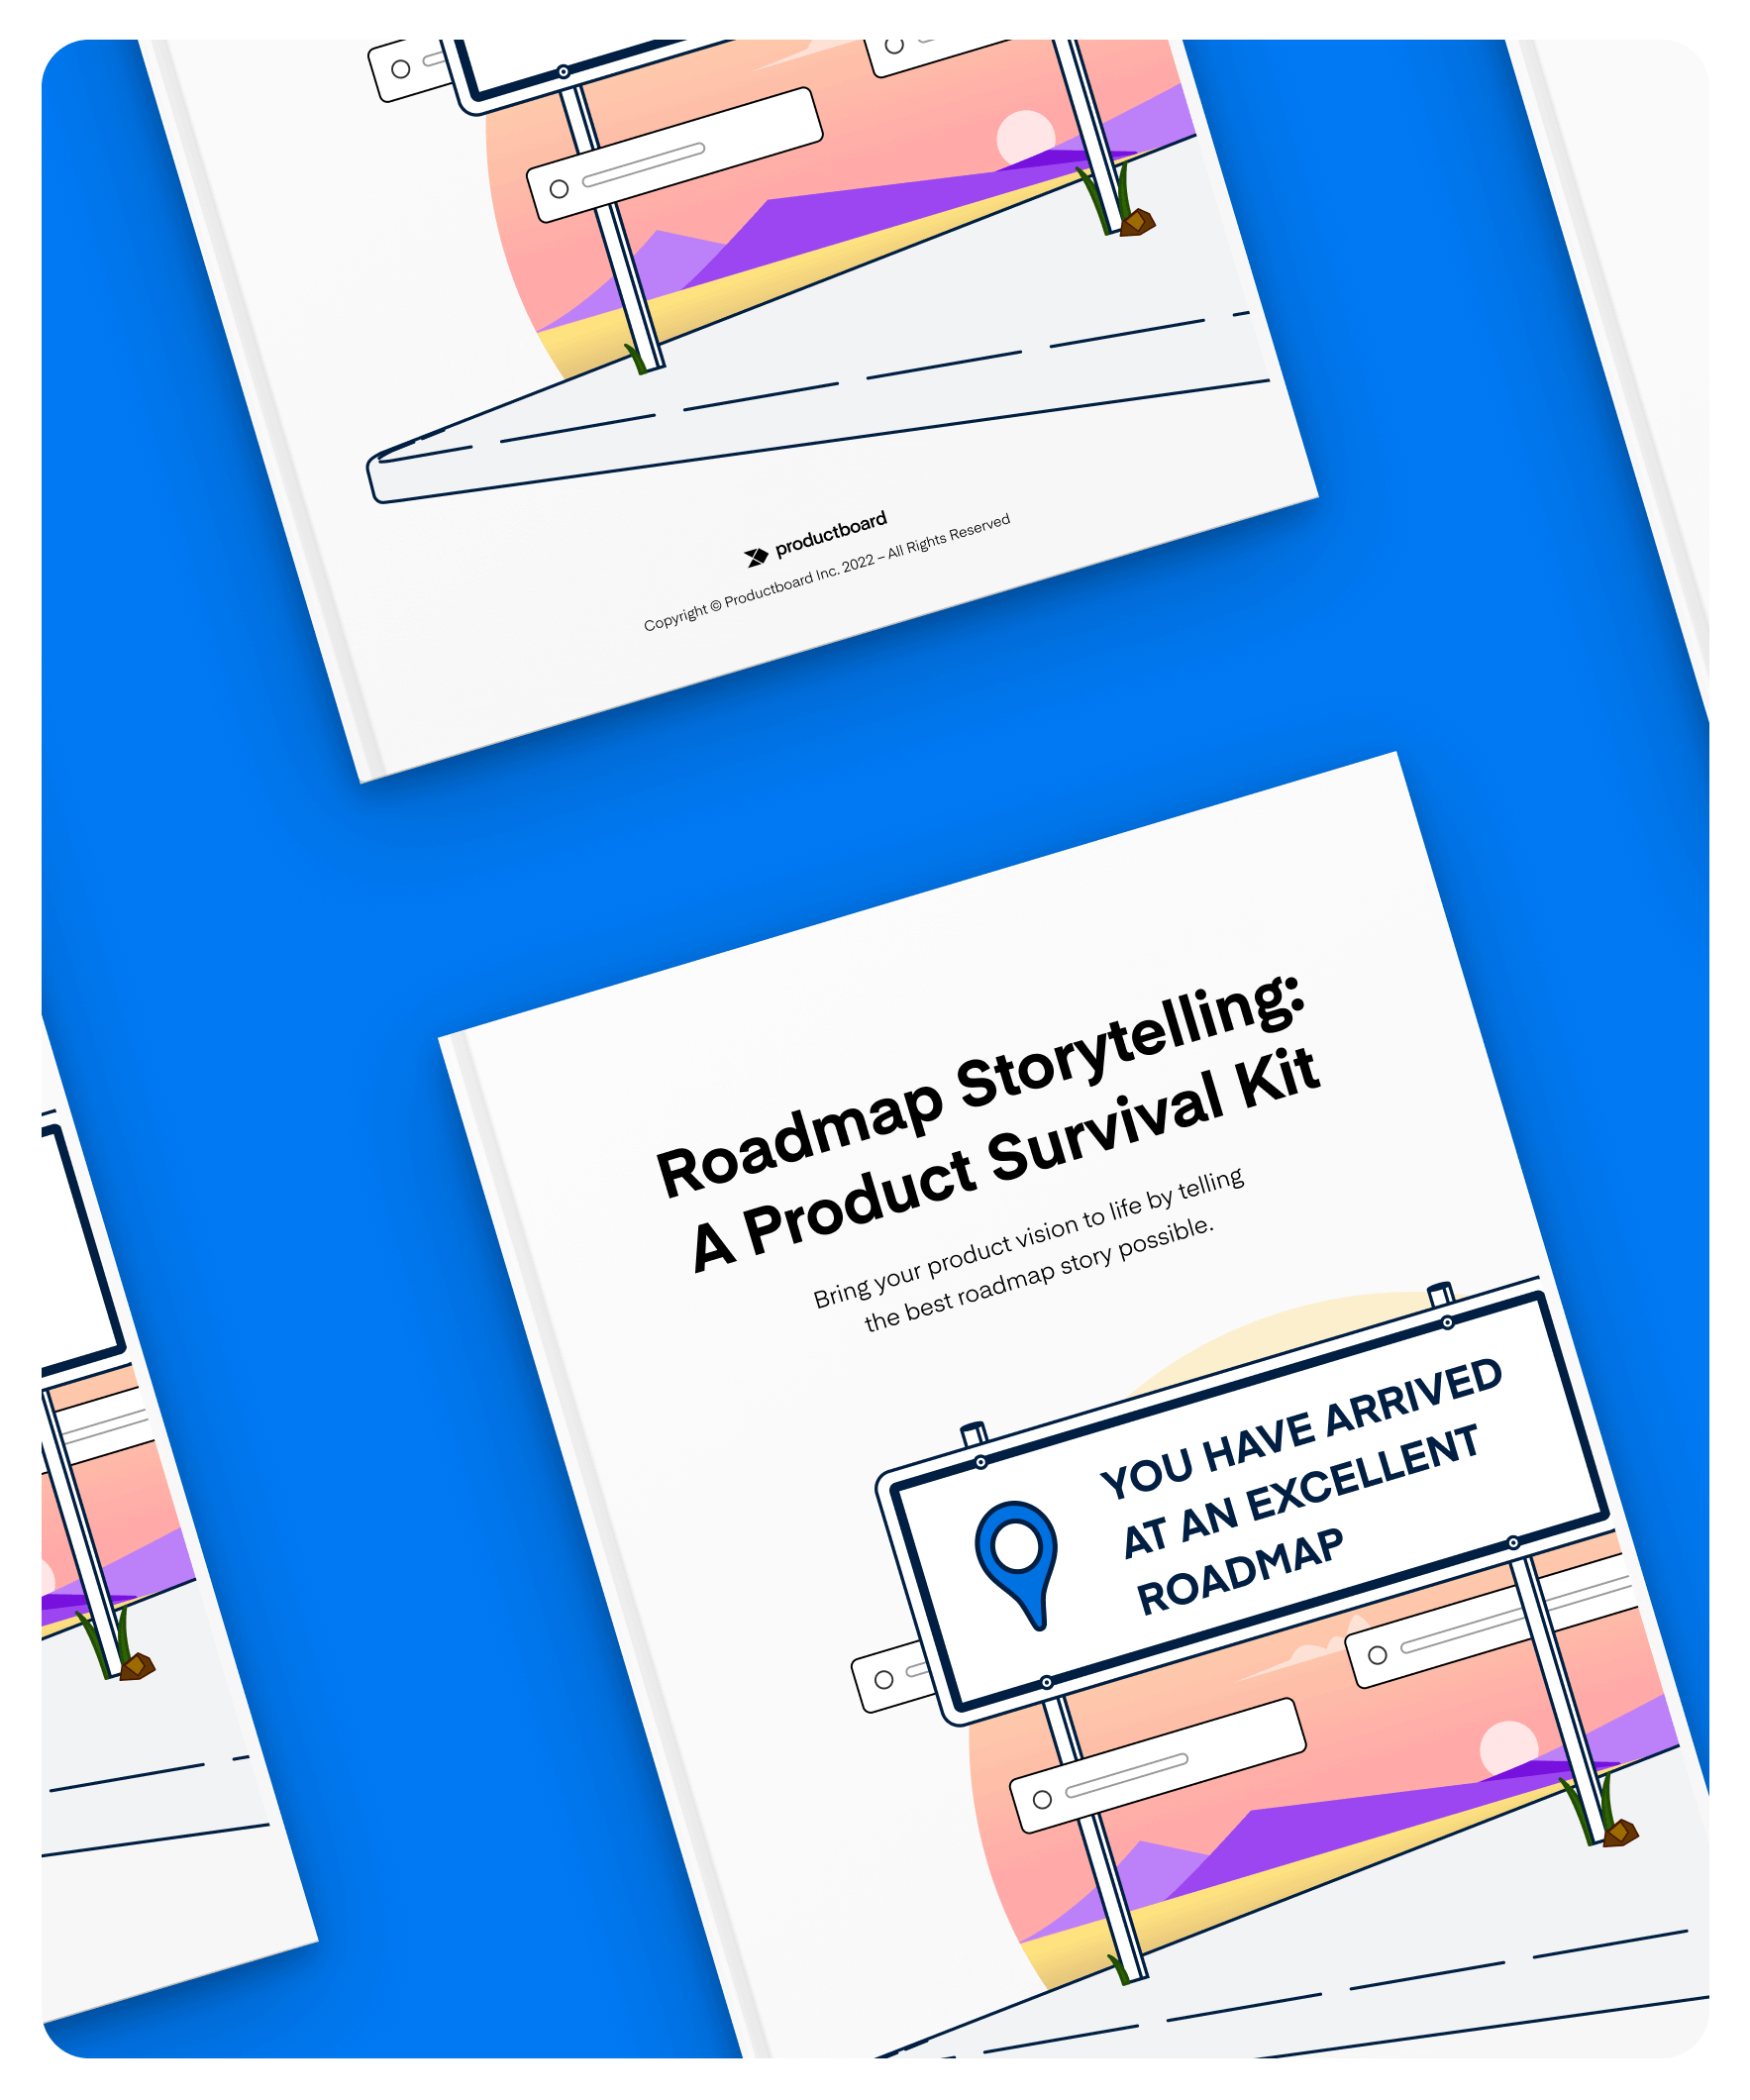 Roadmap Storytelling: A Product Survival Kit